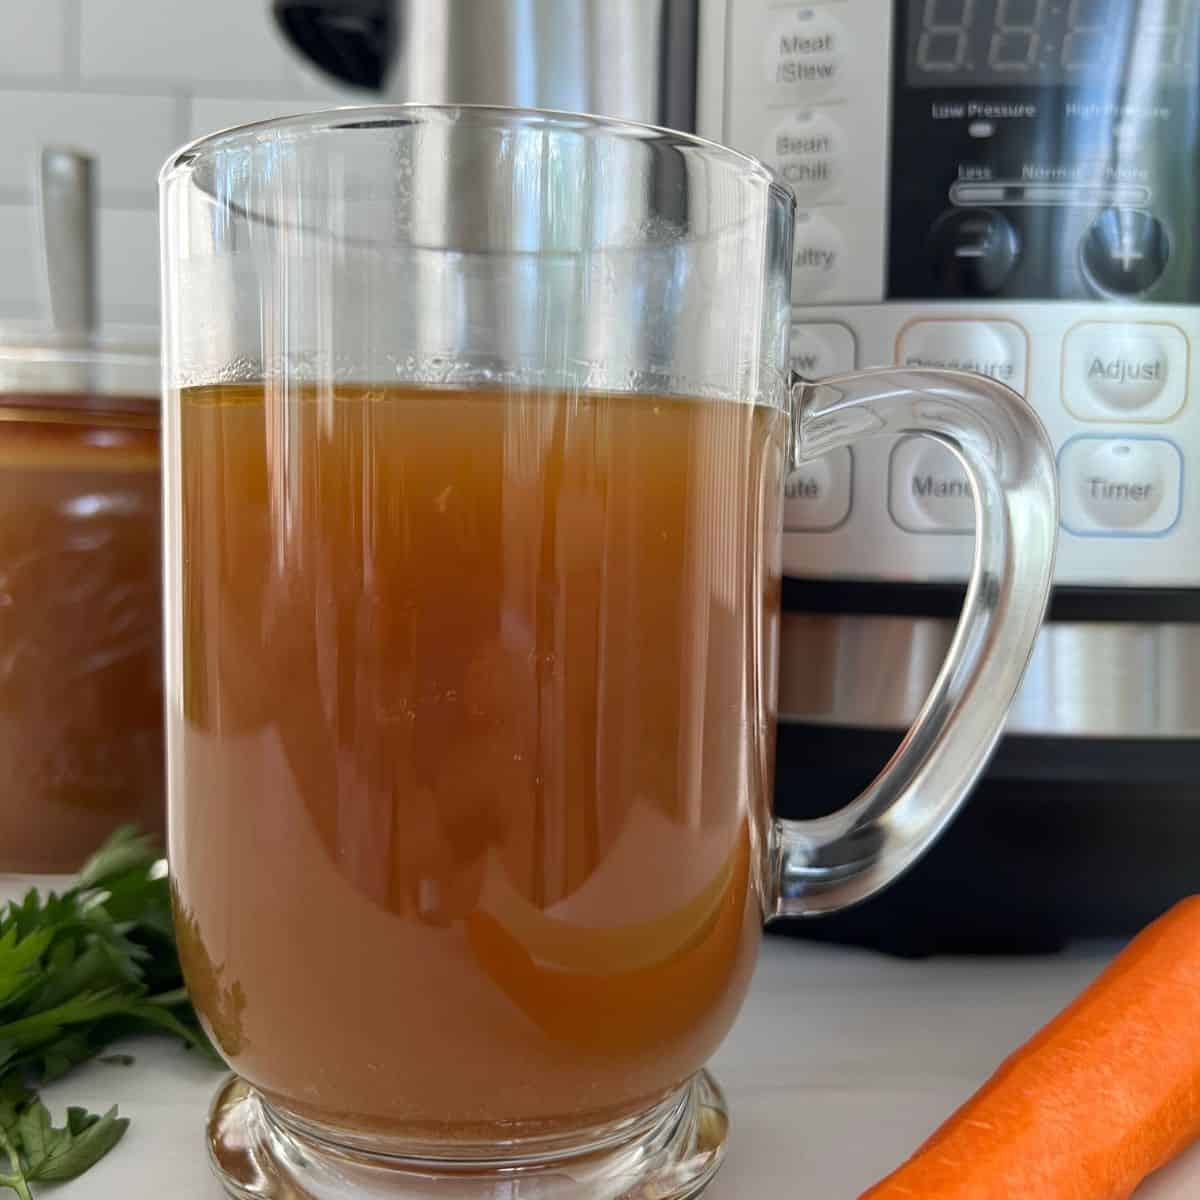 Bone broth in a glass mug with an instant pot in the background.